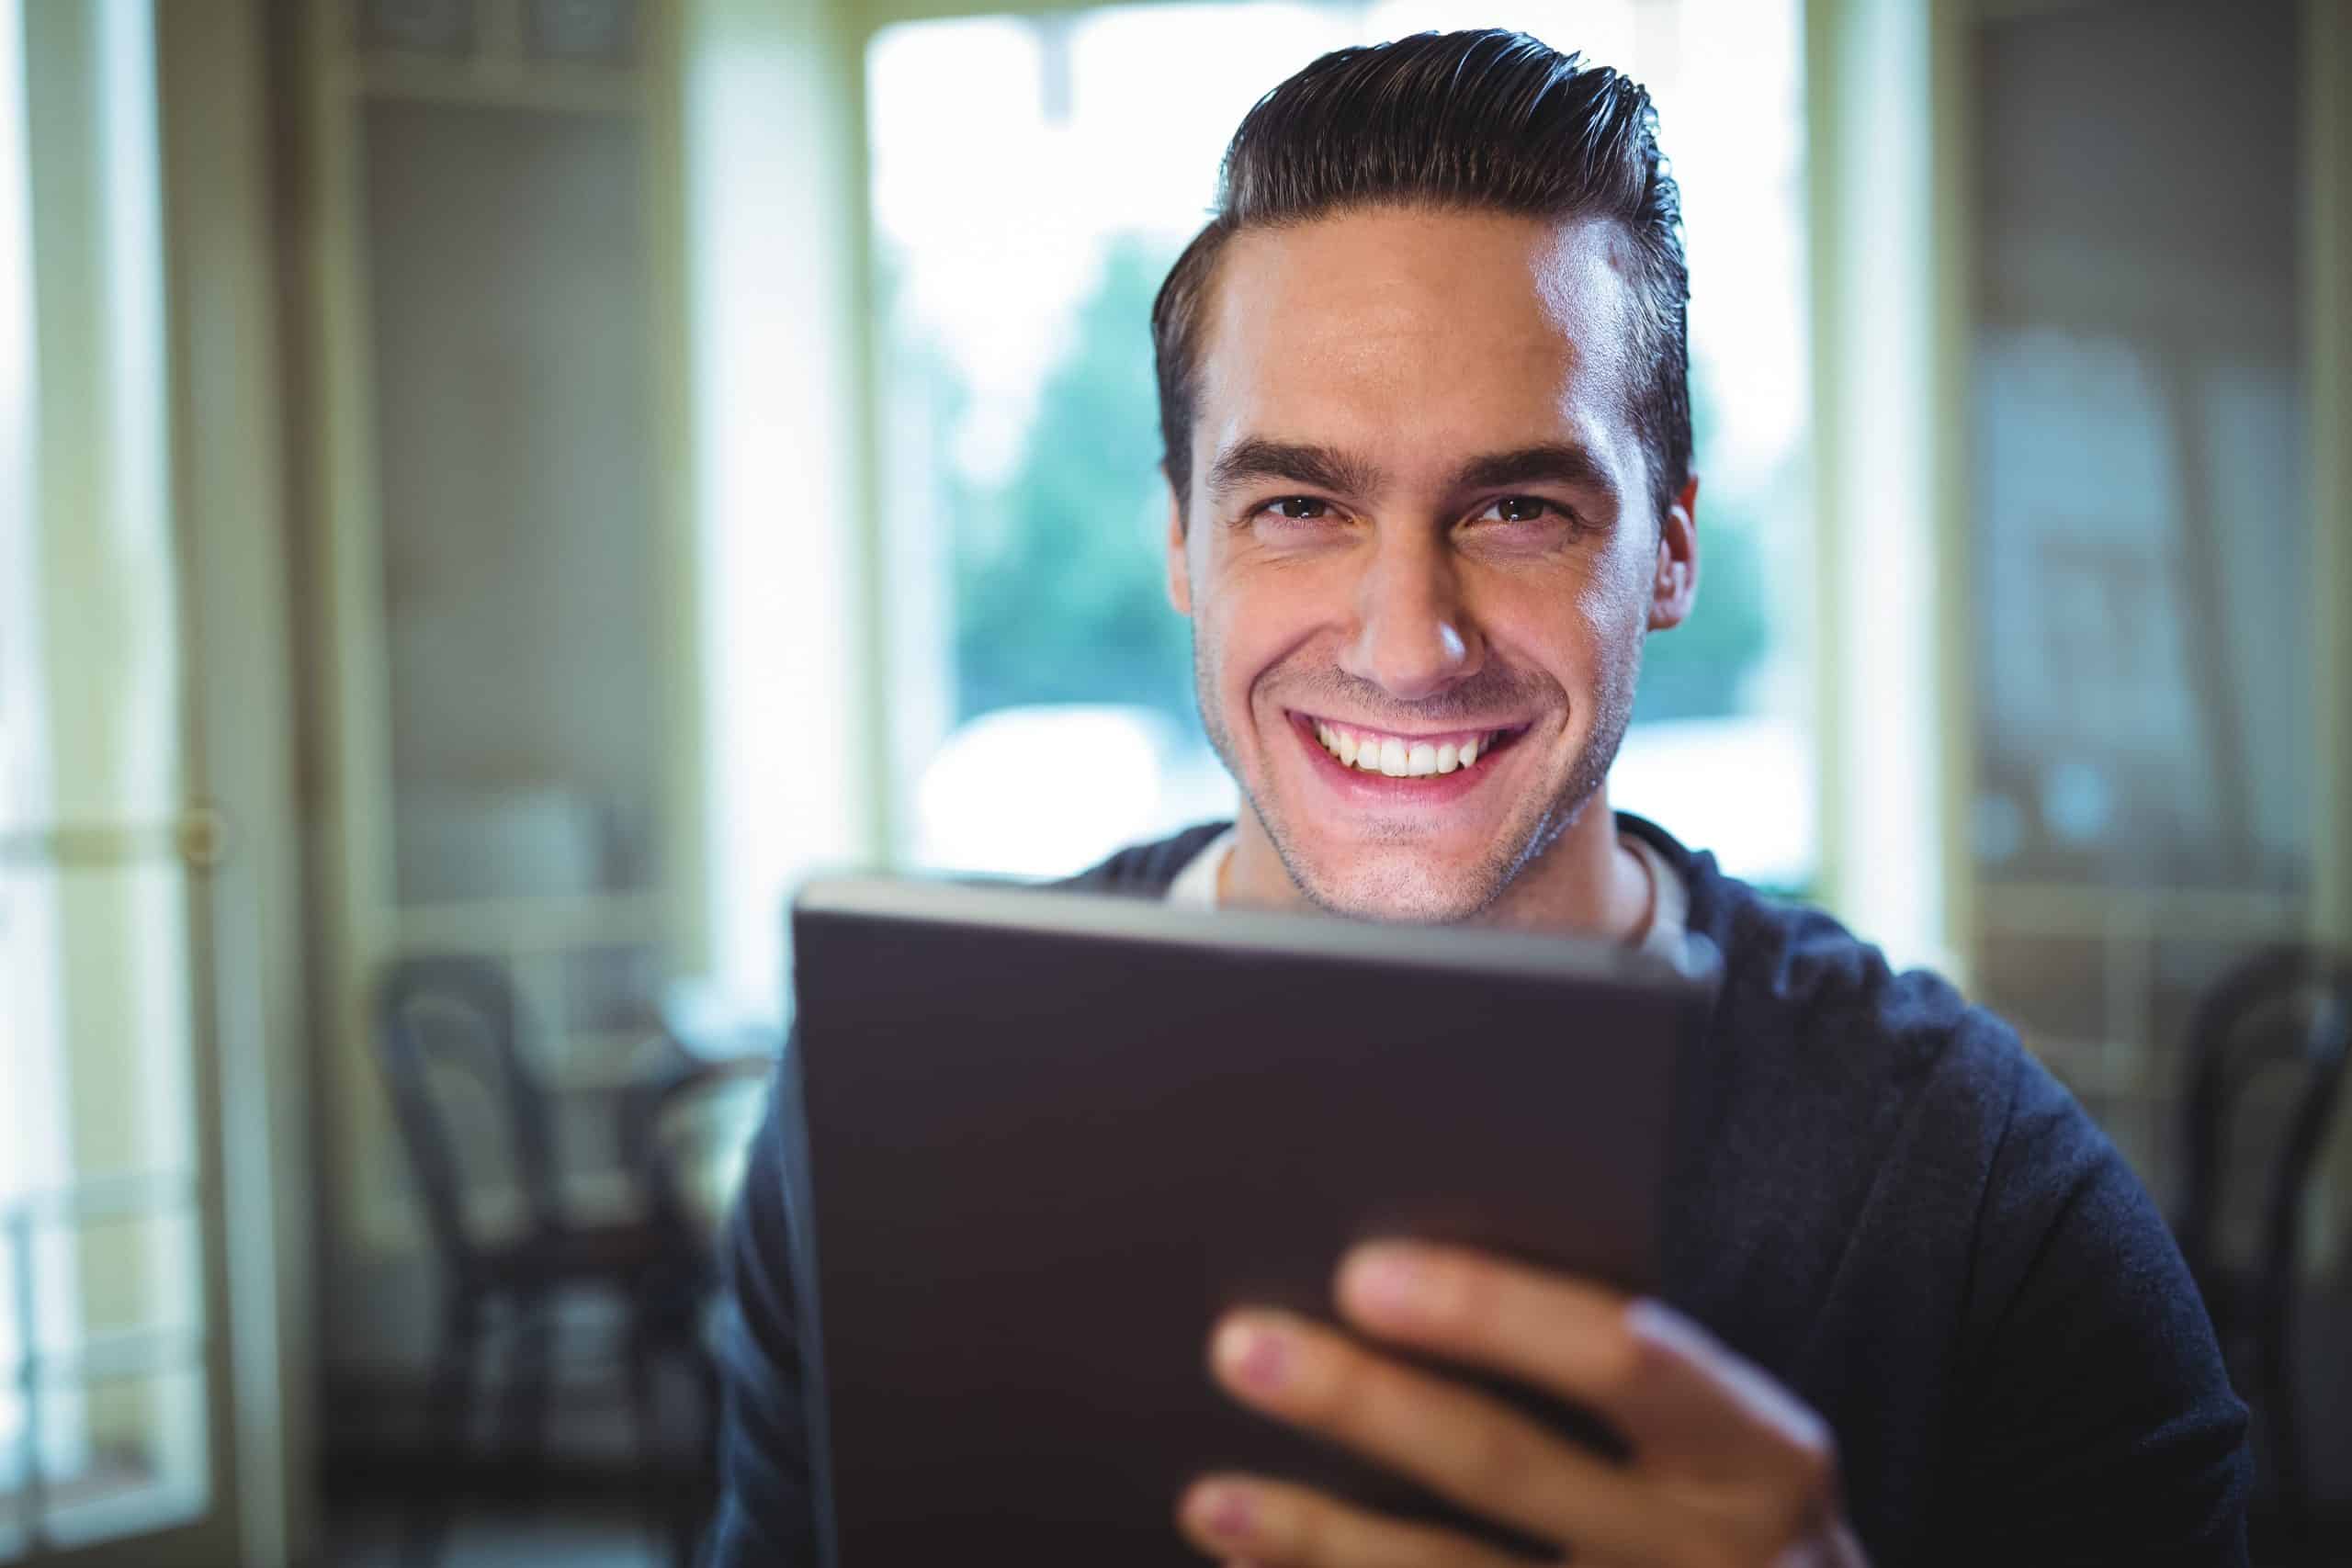 A man is smiling while using a tablet computer.